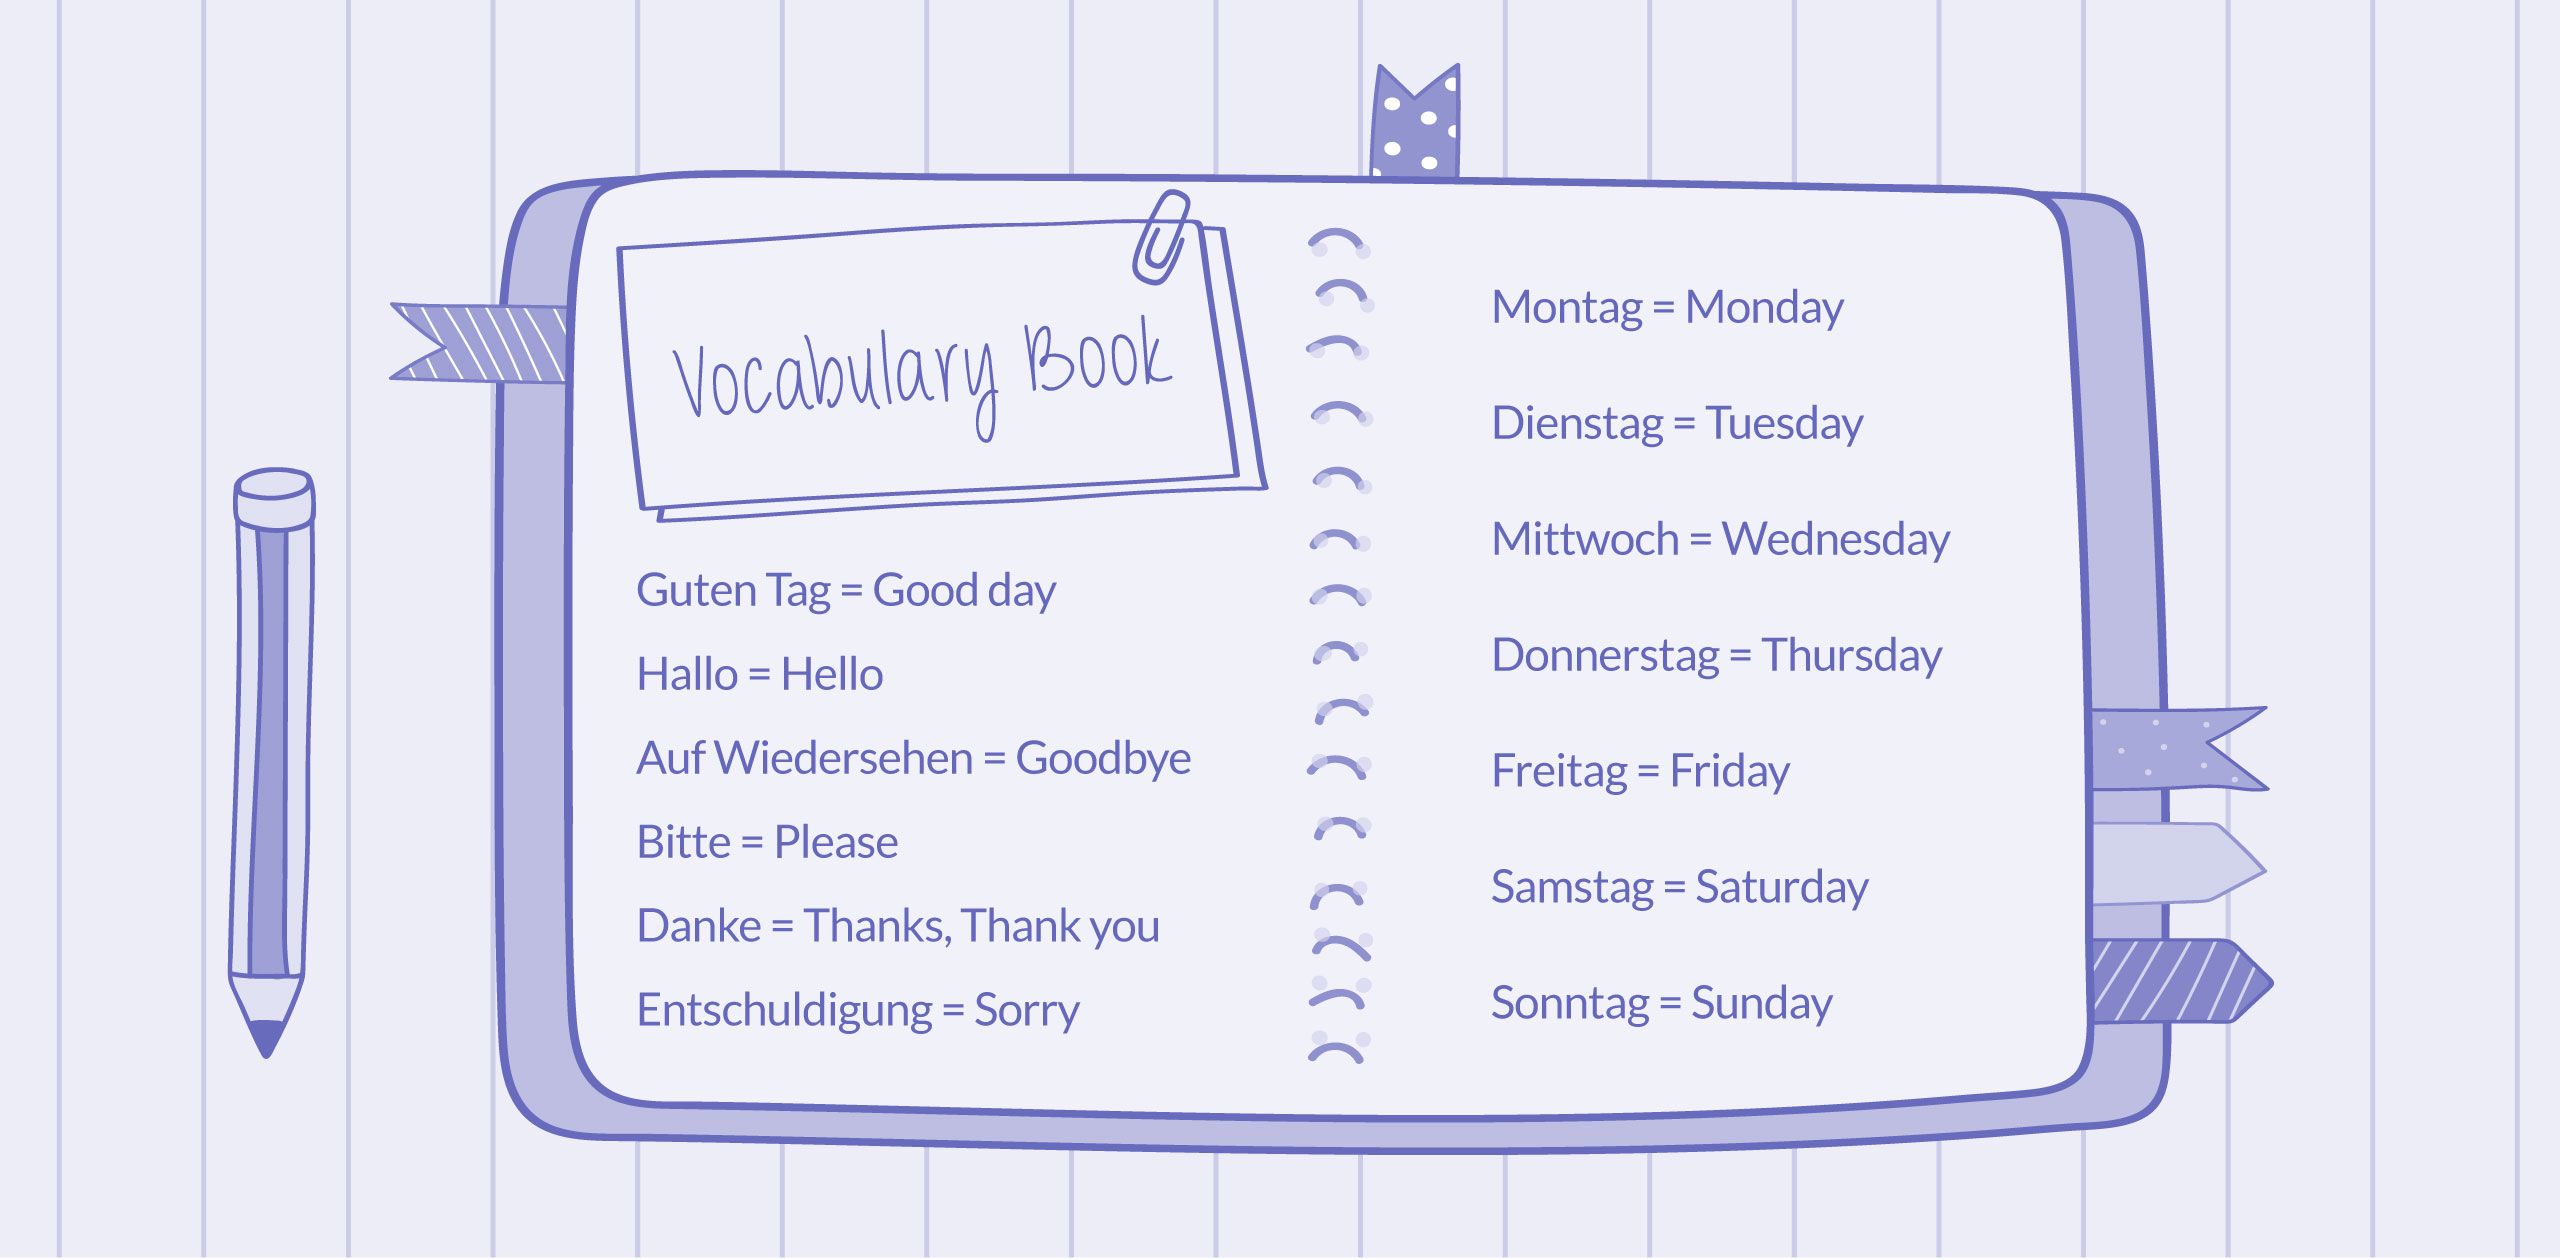 How to build vocabulary in German